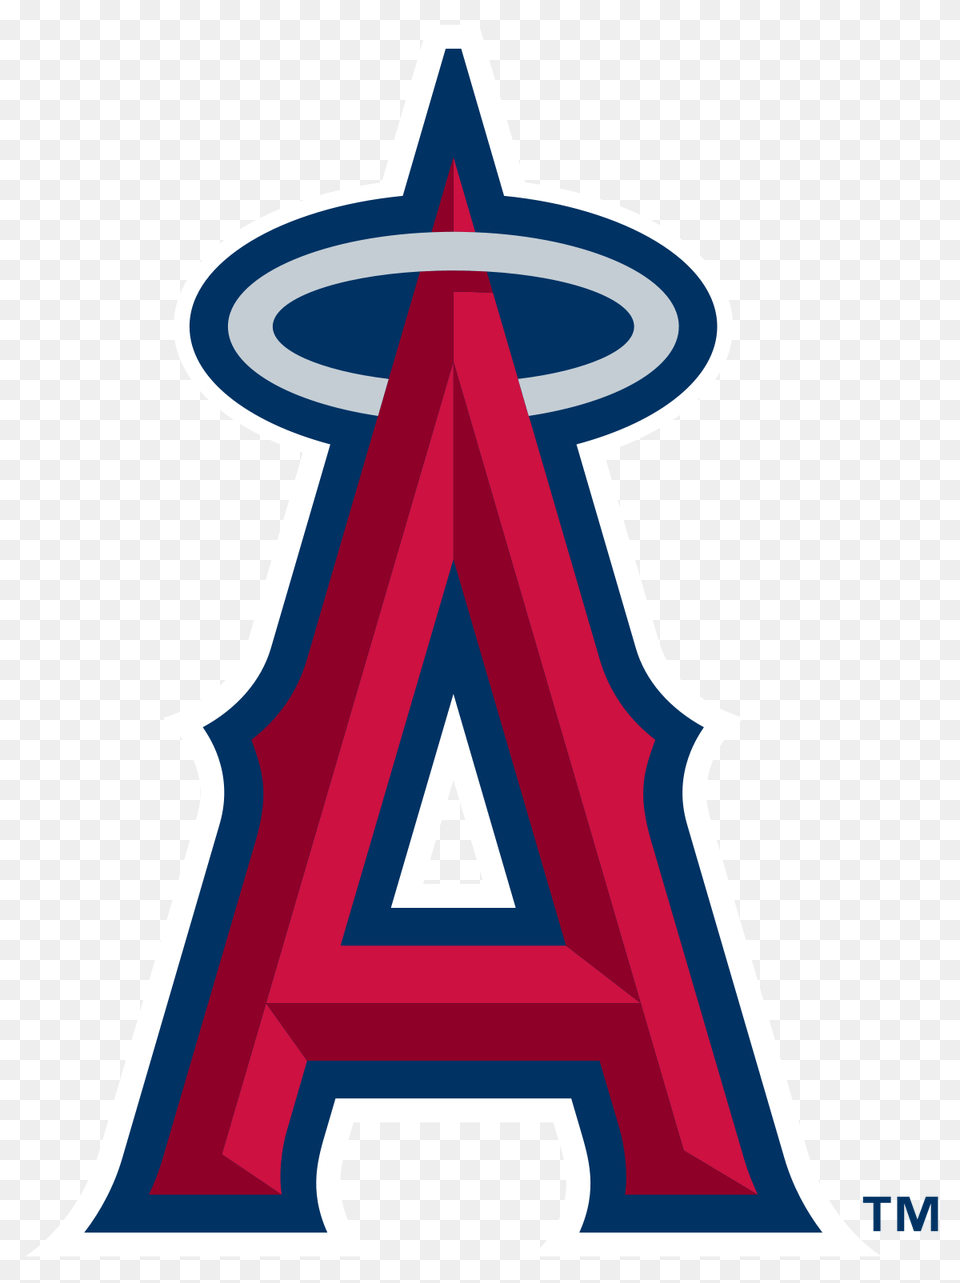 Mlb Team Jobs, Dynamite, Weapon Png